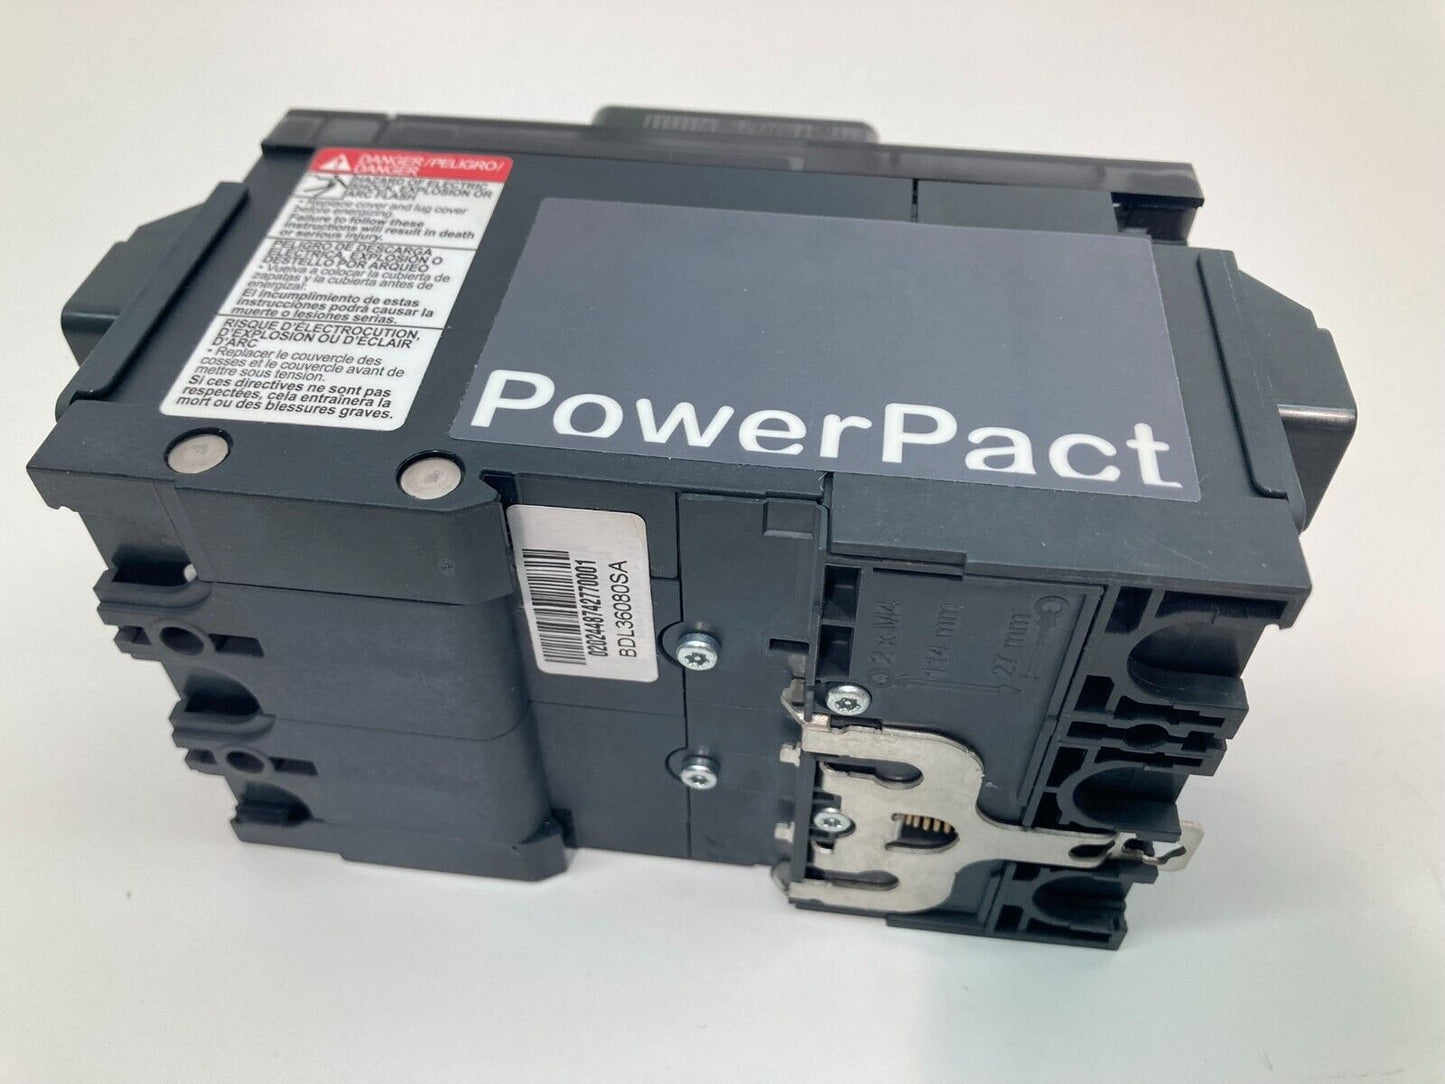 New SCHNEIDER ELECTRIC BDL36080SA PowerPacT Circuit Breaker